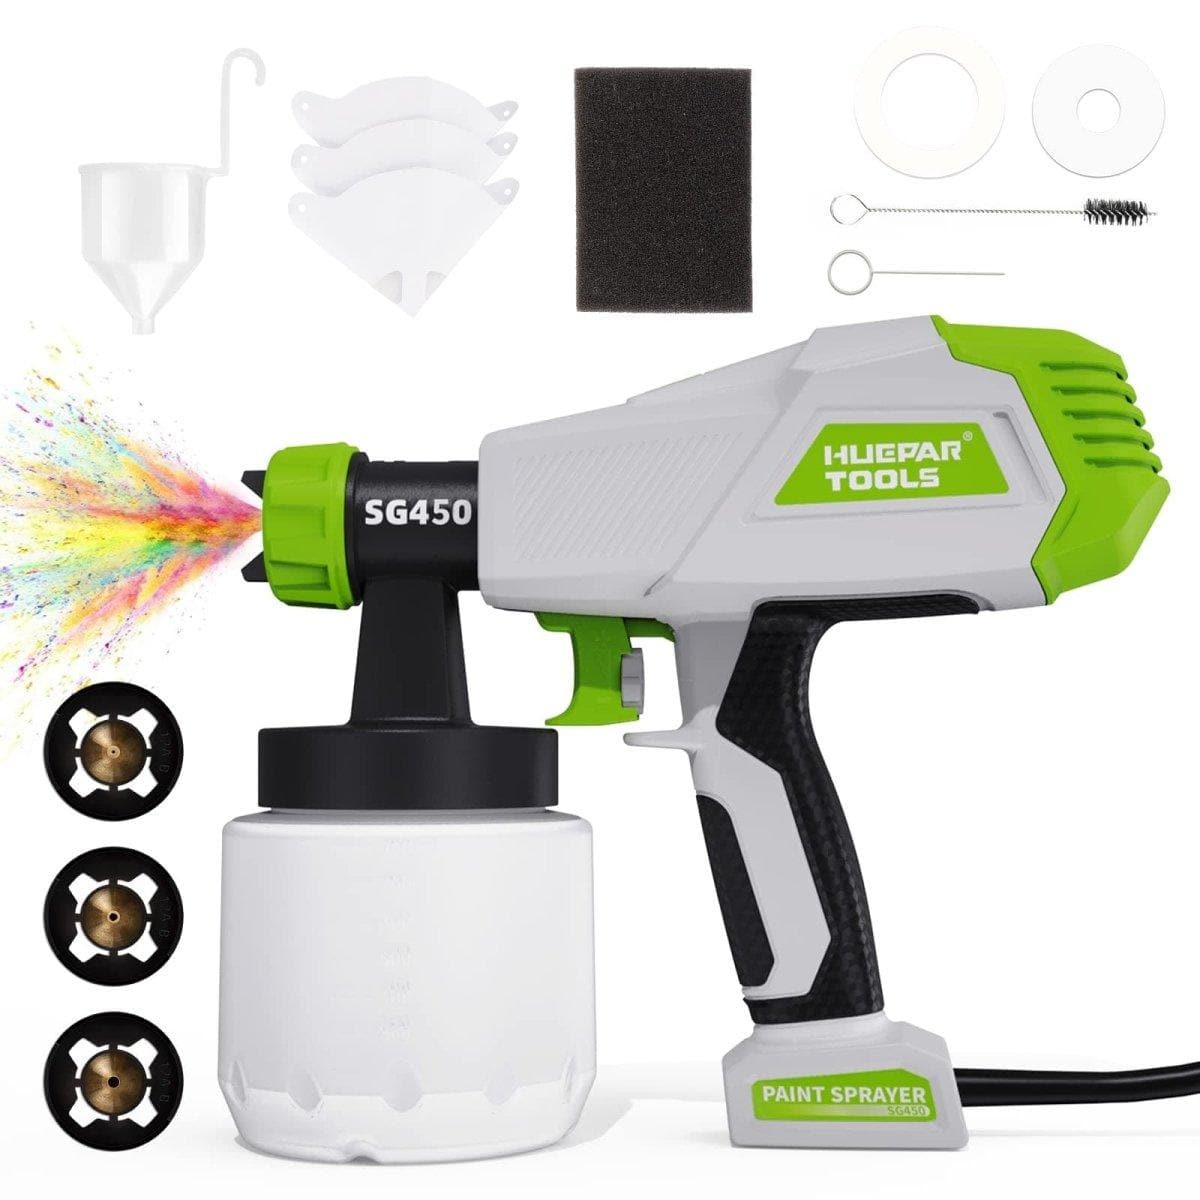 Huepar Tools SG450 HVLP electric paint sprayer with 800ml capacity and 3 metal nozzles, suitable for home interior and exterior walls, ceiling, cabinet, fence, and chair spraying5